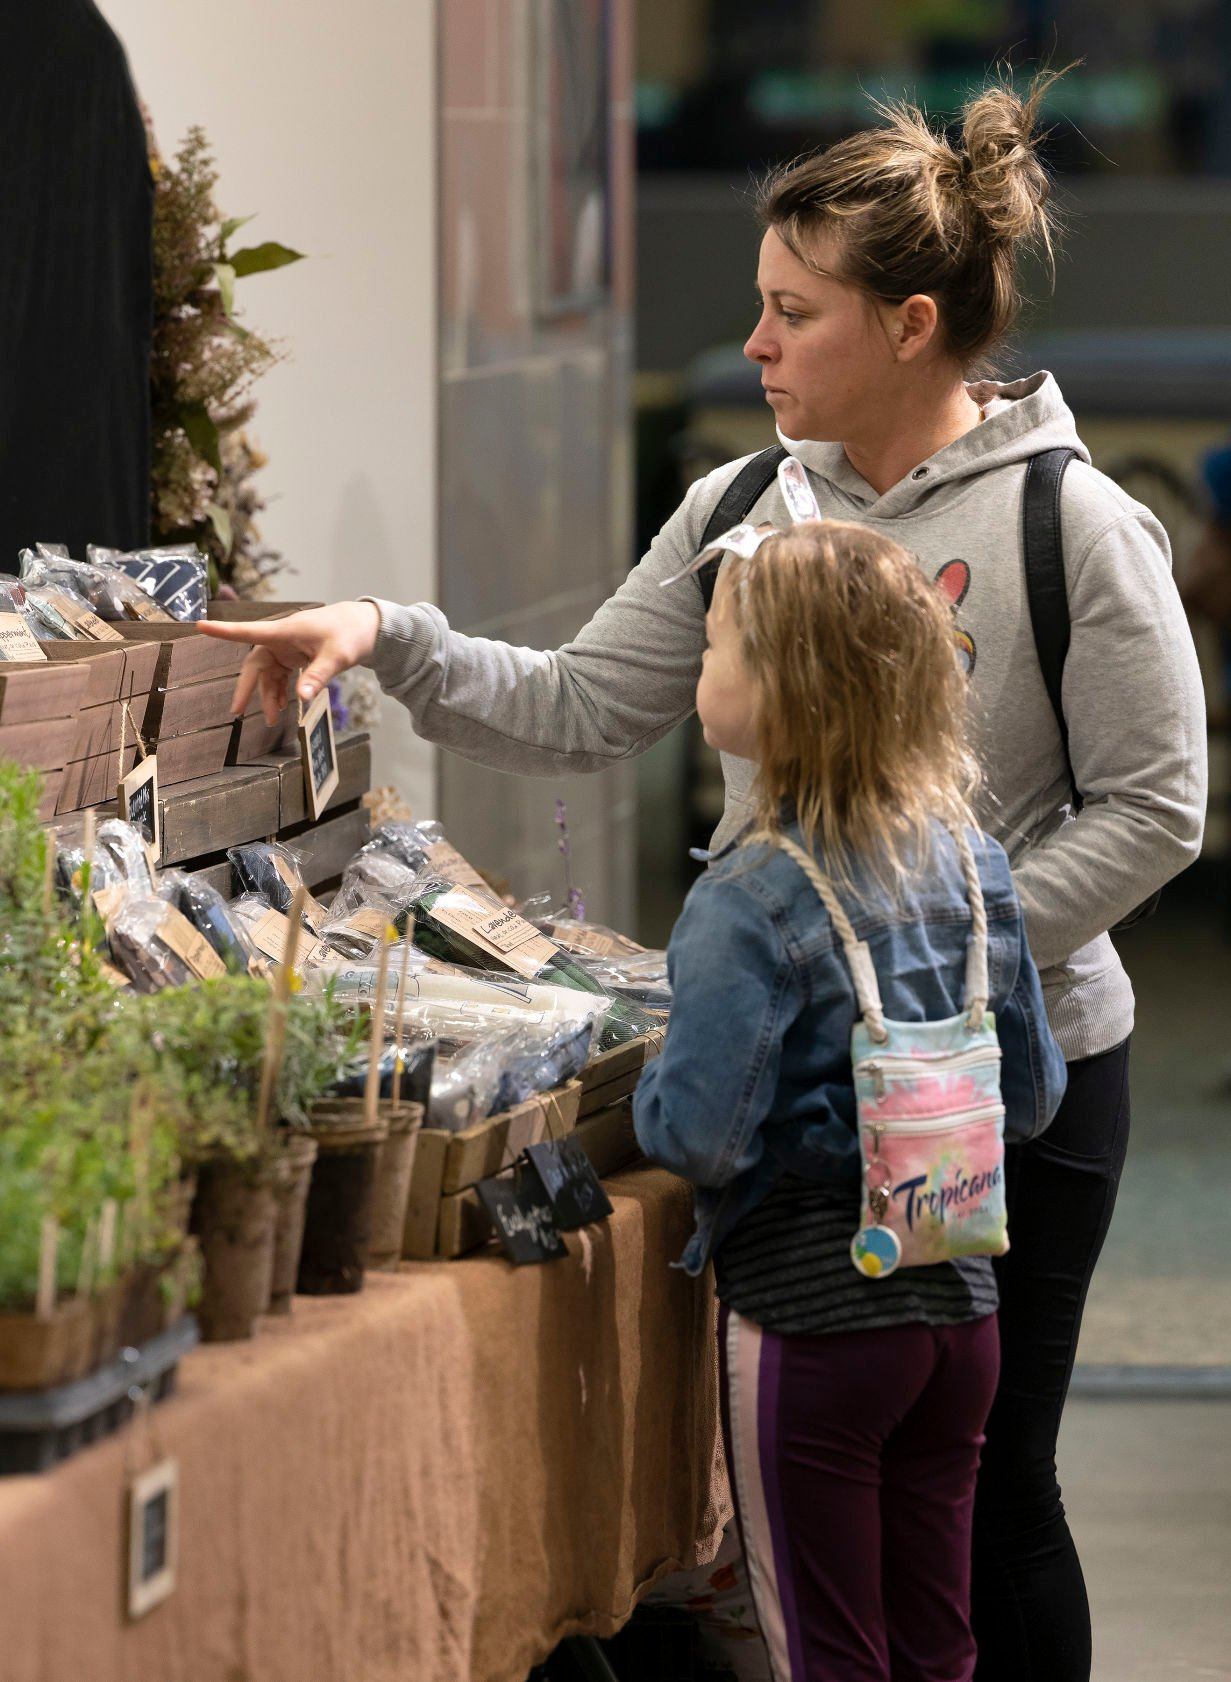 Jessica Flatin and her daughter Charley shop at Dobie’s stand during the winter farmers market at Kennedy Mall in April.    PHOTO CREDIT: Stephen Gassman